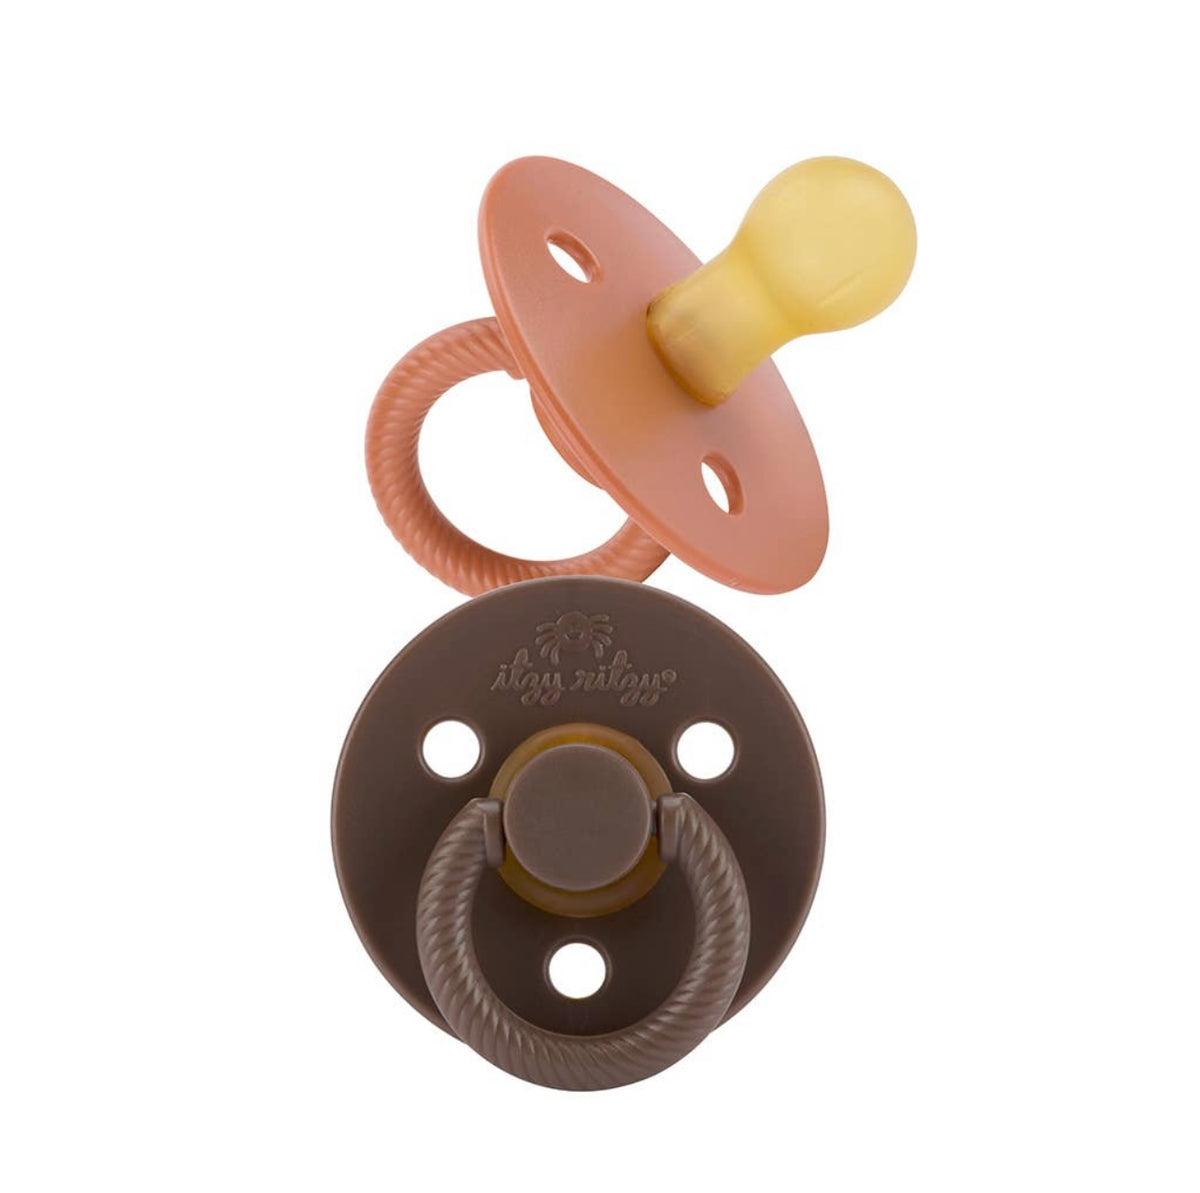 ITZY SOOTHER PACIFIER SETS